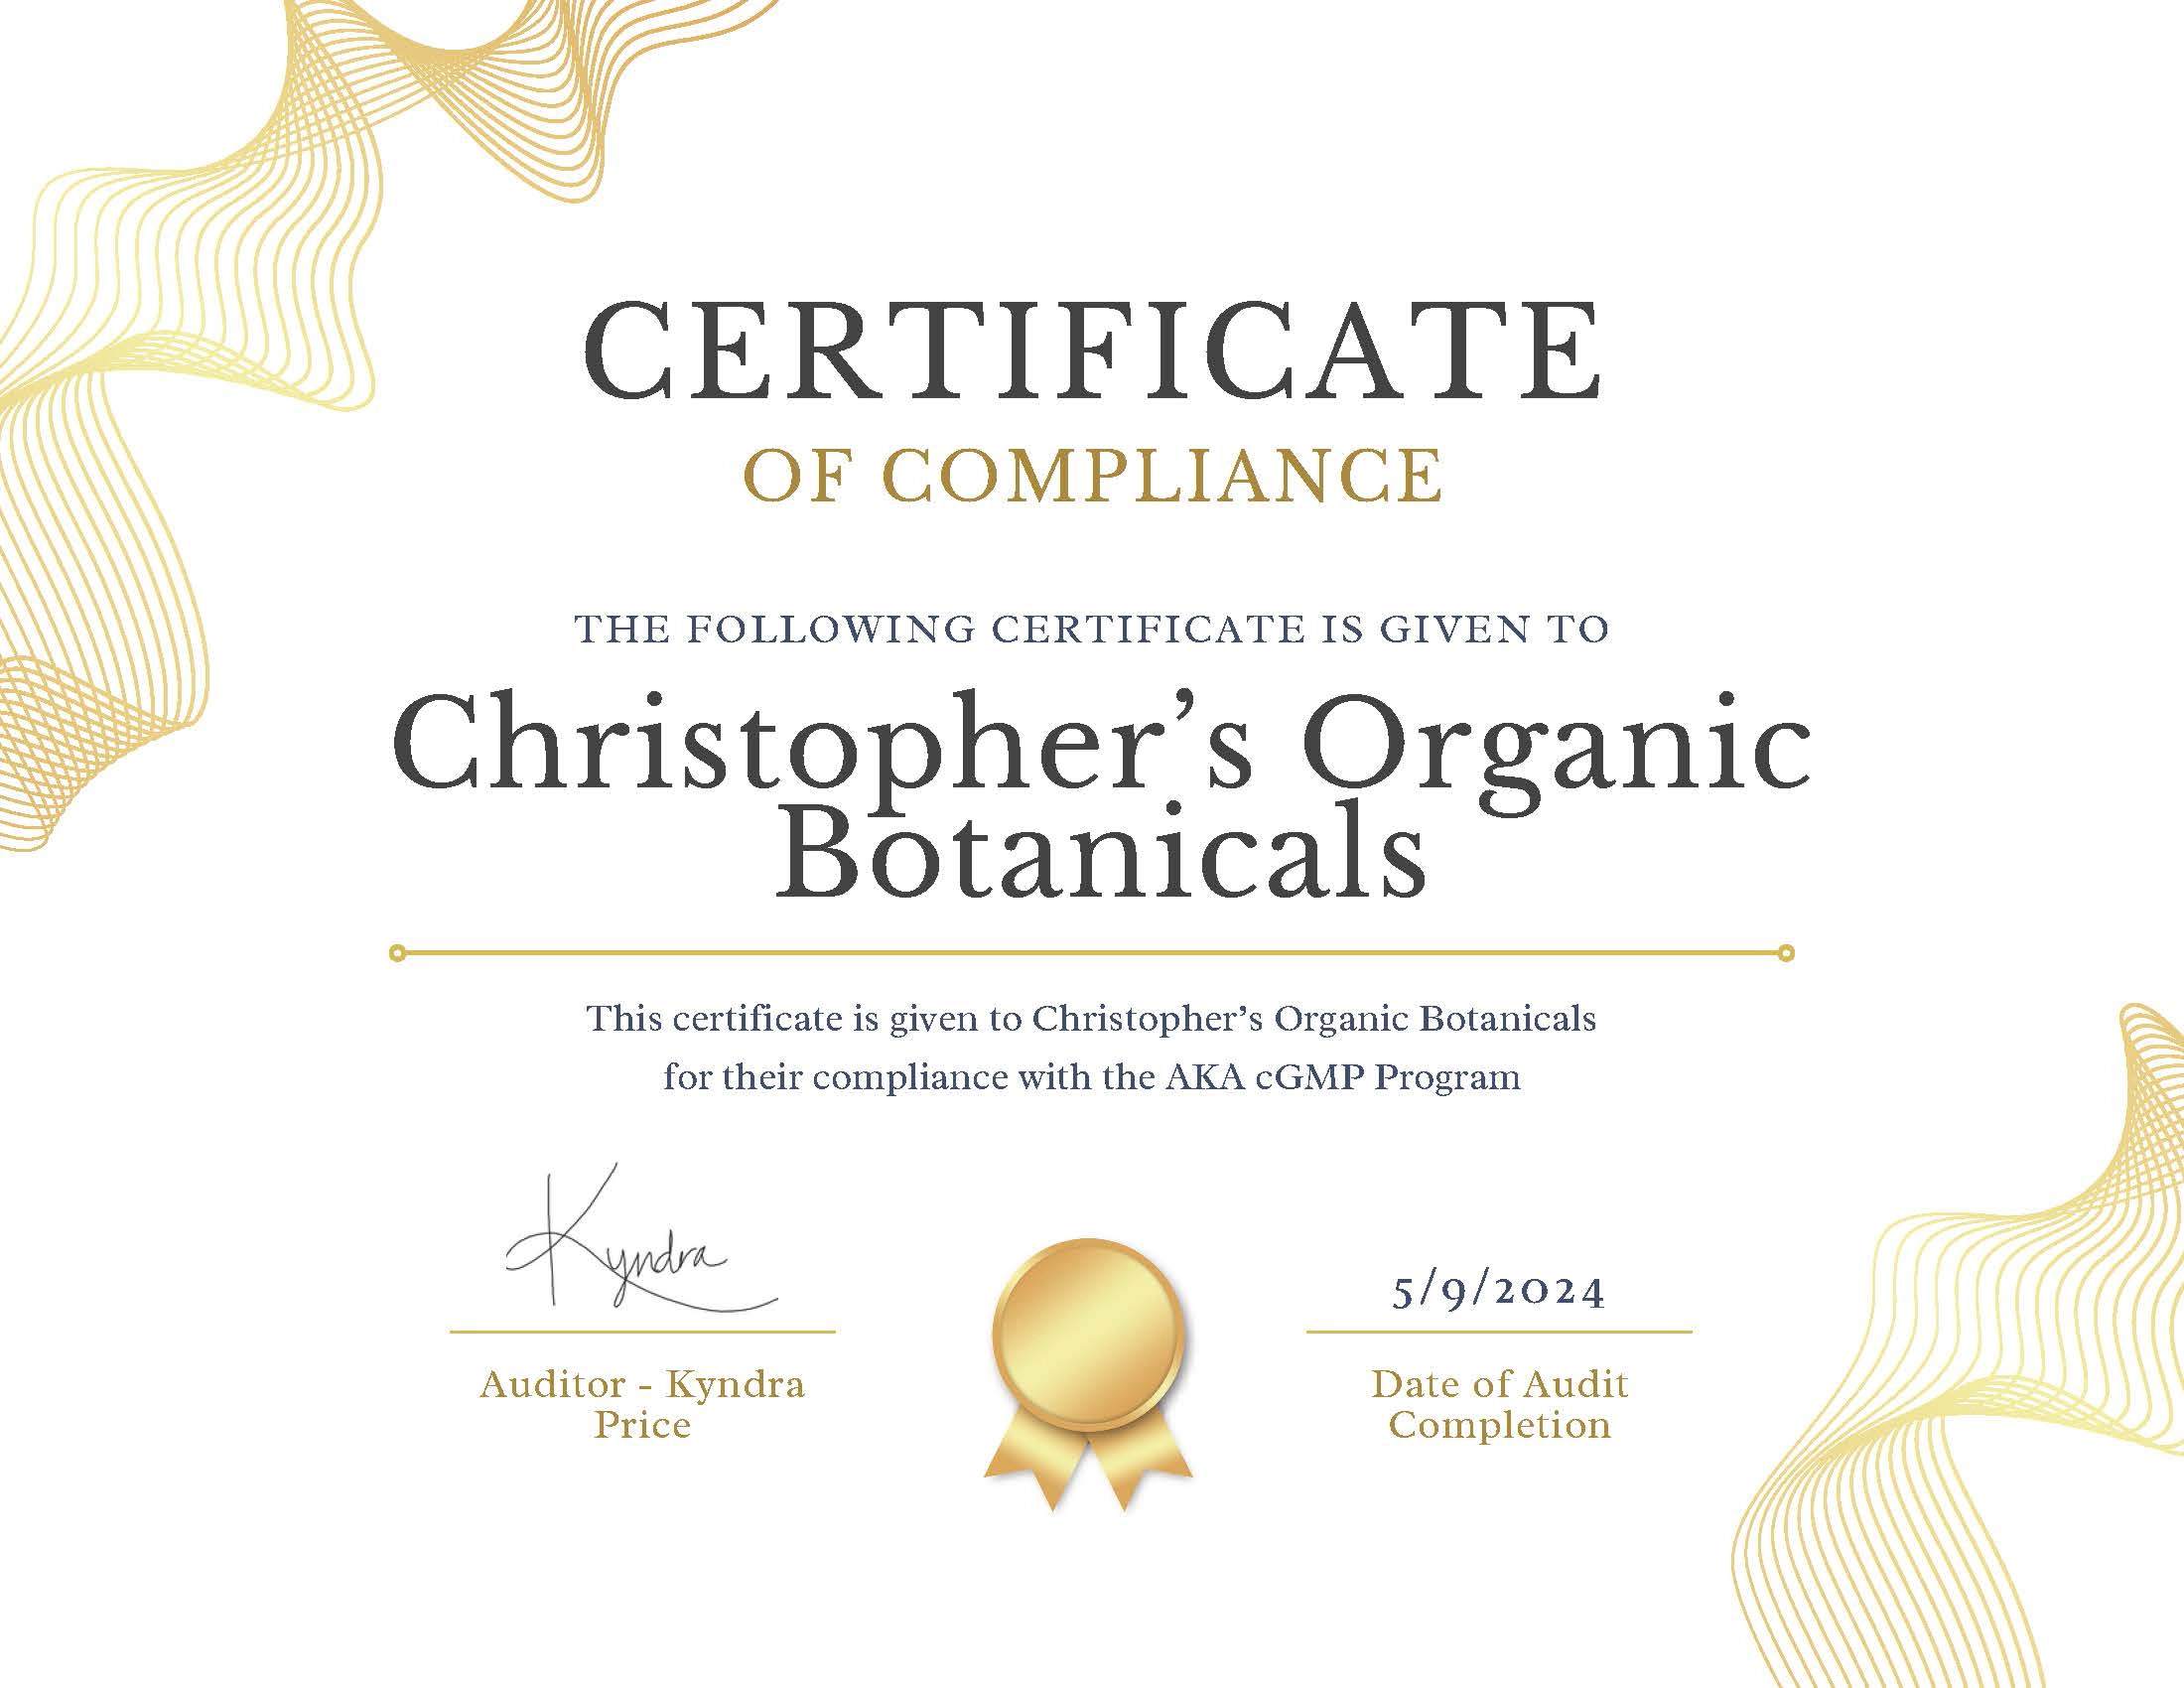 Certificate of Compliance for Christopher's Organic Botanicals Passing the American Kratom Association cGMP Program.